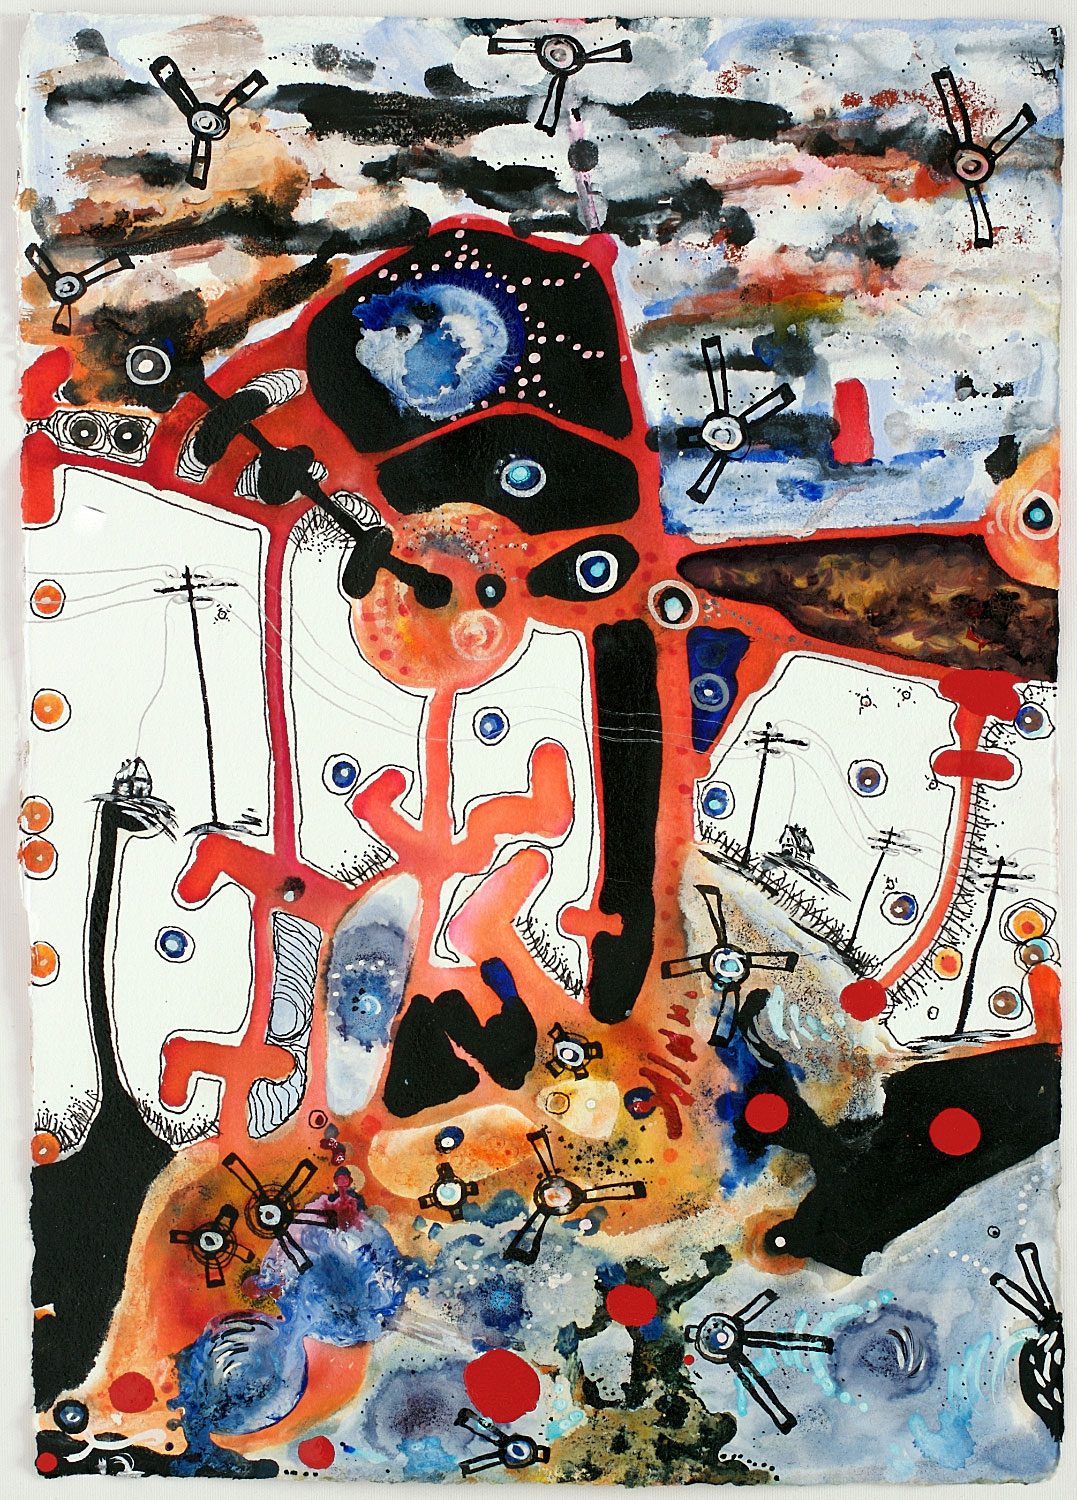 Margaret Withers, relation to one’s own past, 2013. Gouache, ink, watercolor, enamel on paper, 20 x 14 x .5 in.